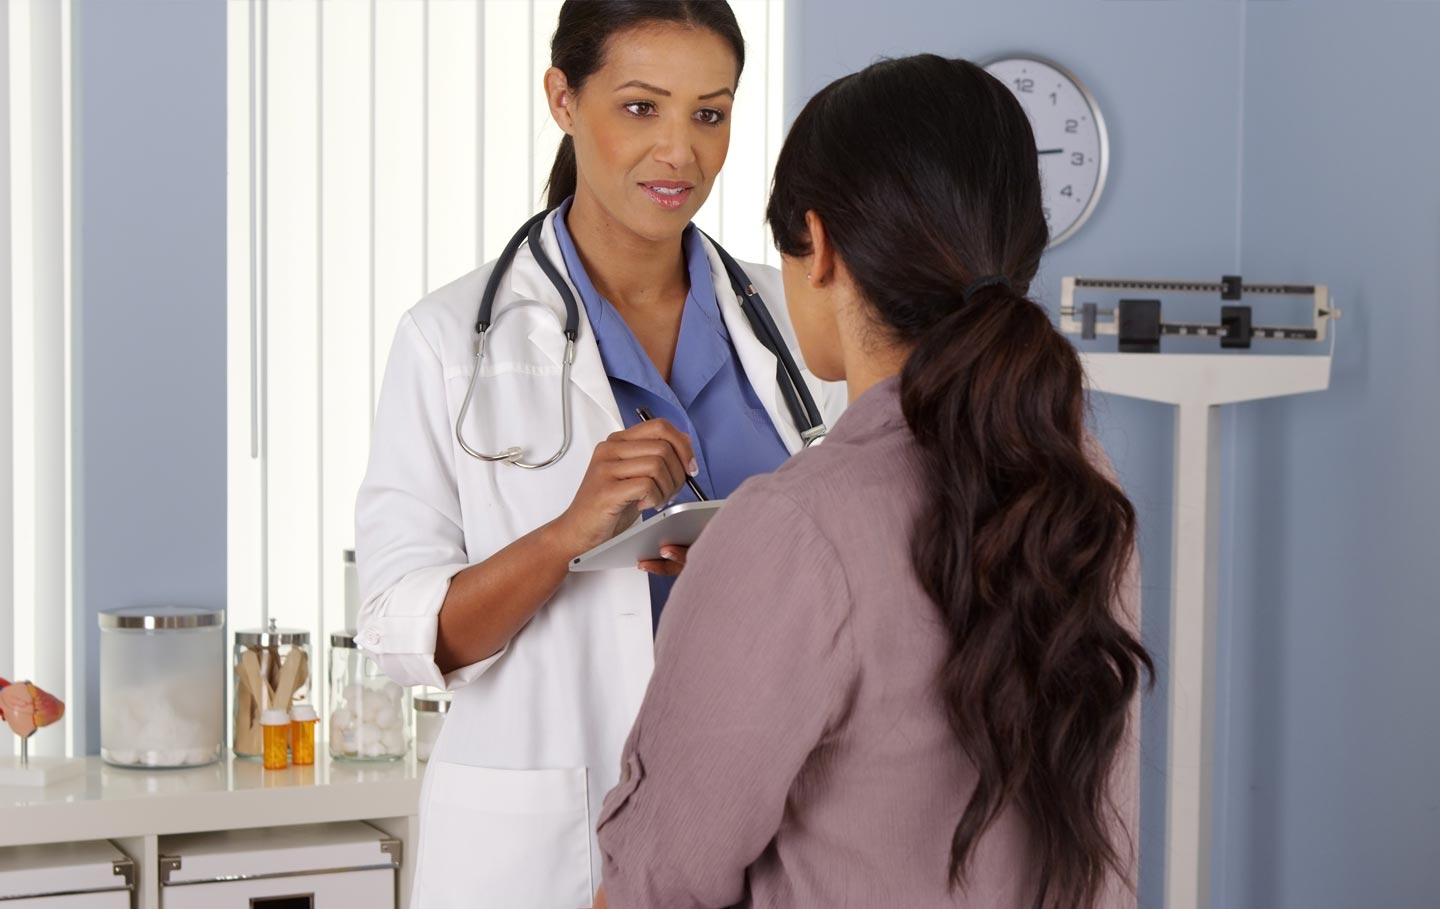 Doctor asking patient questions